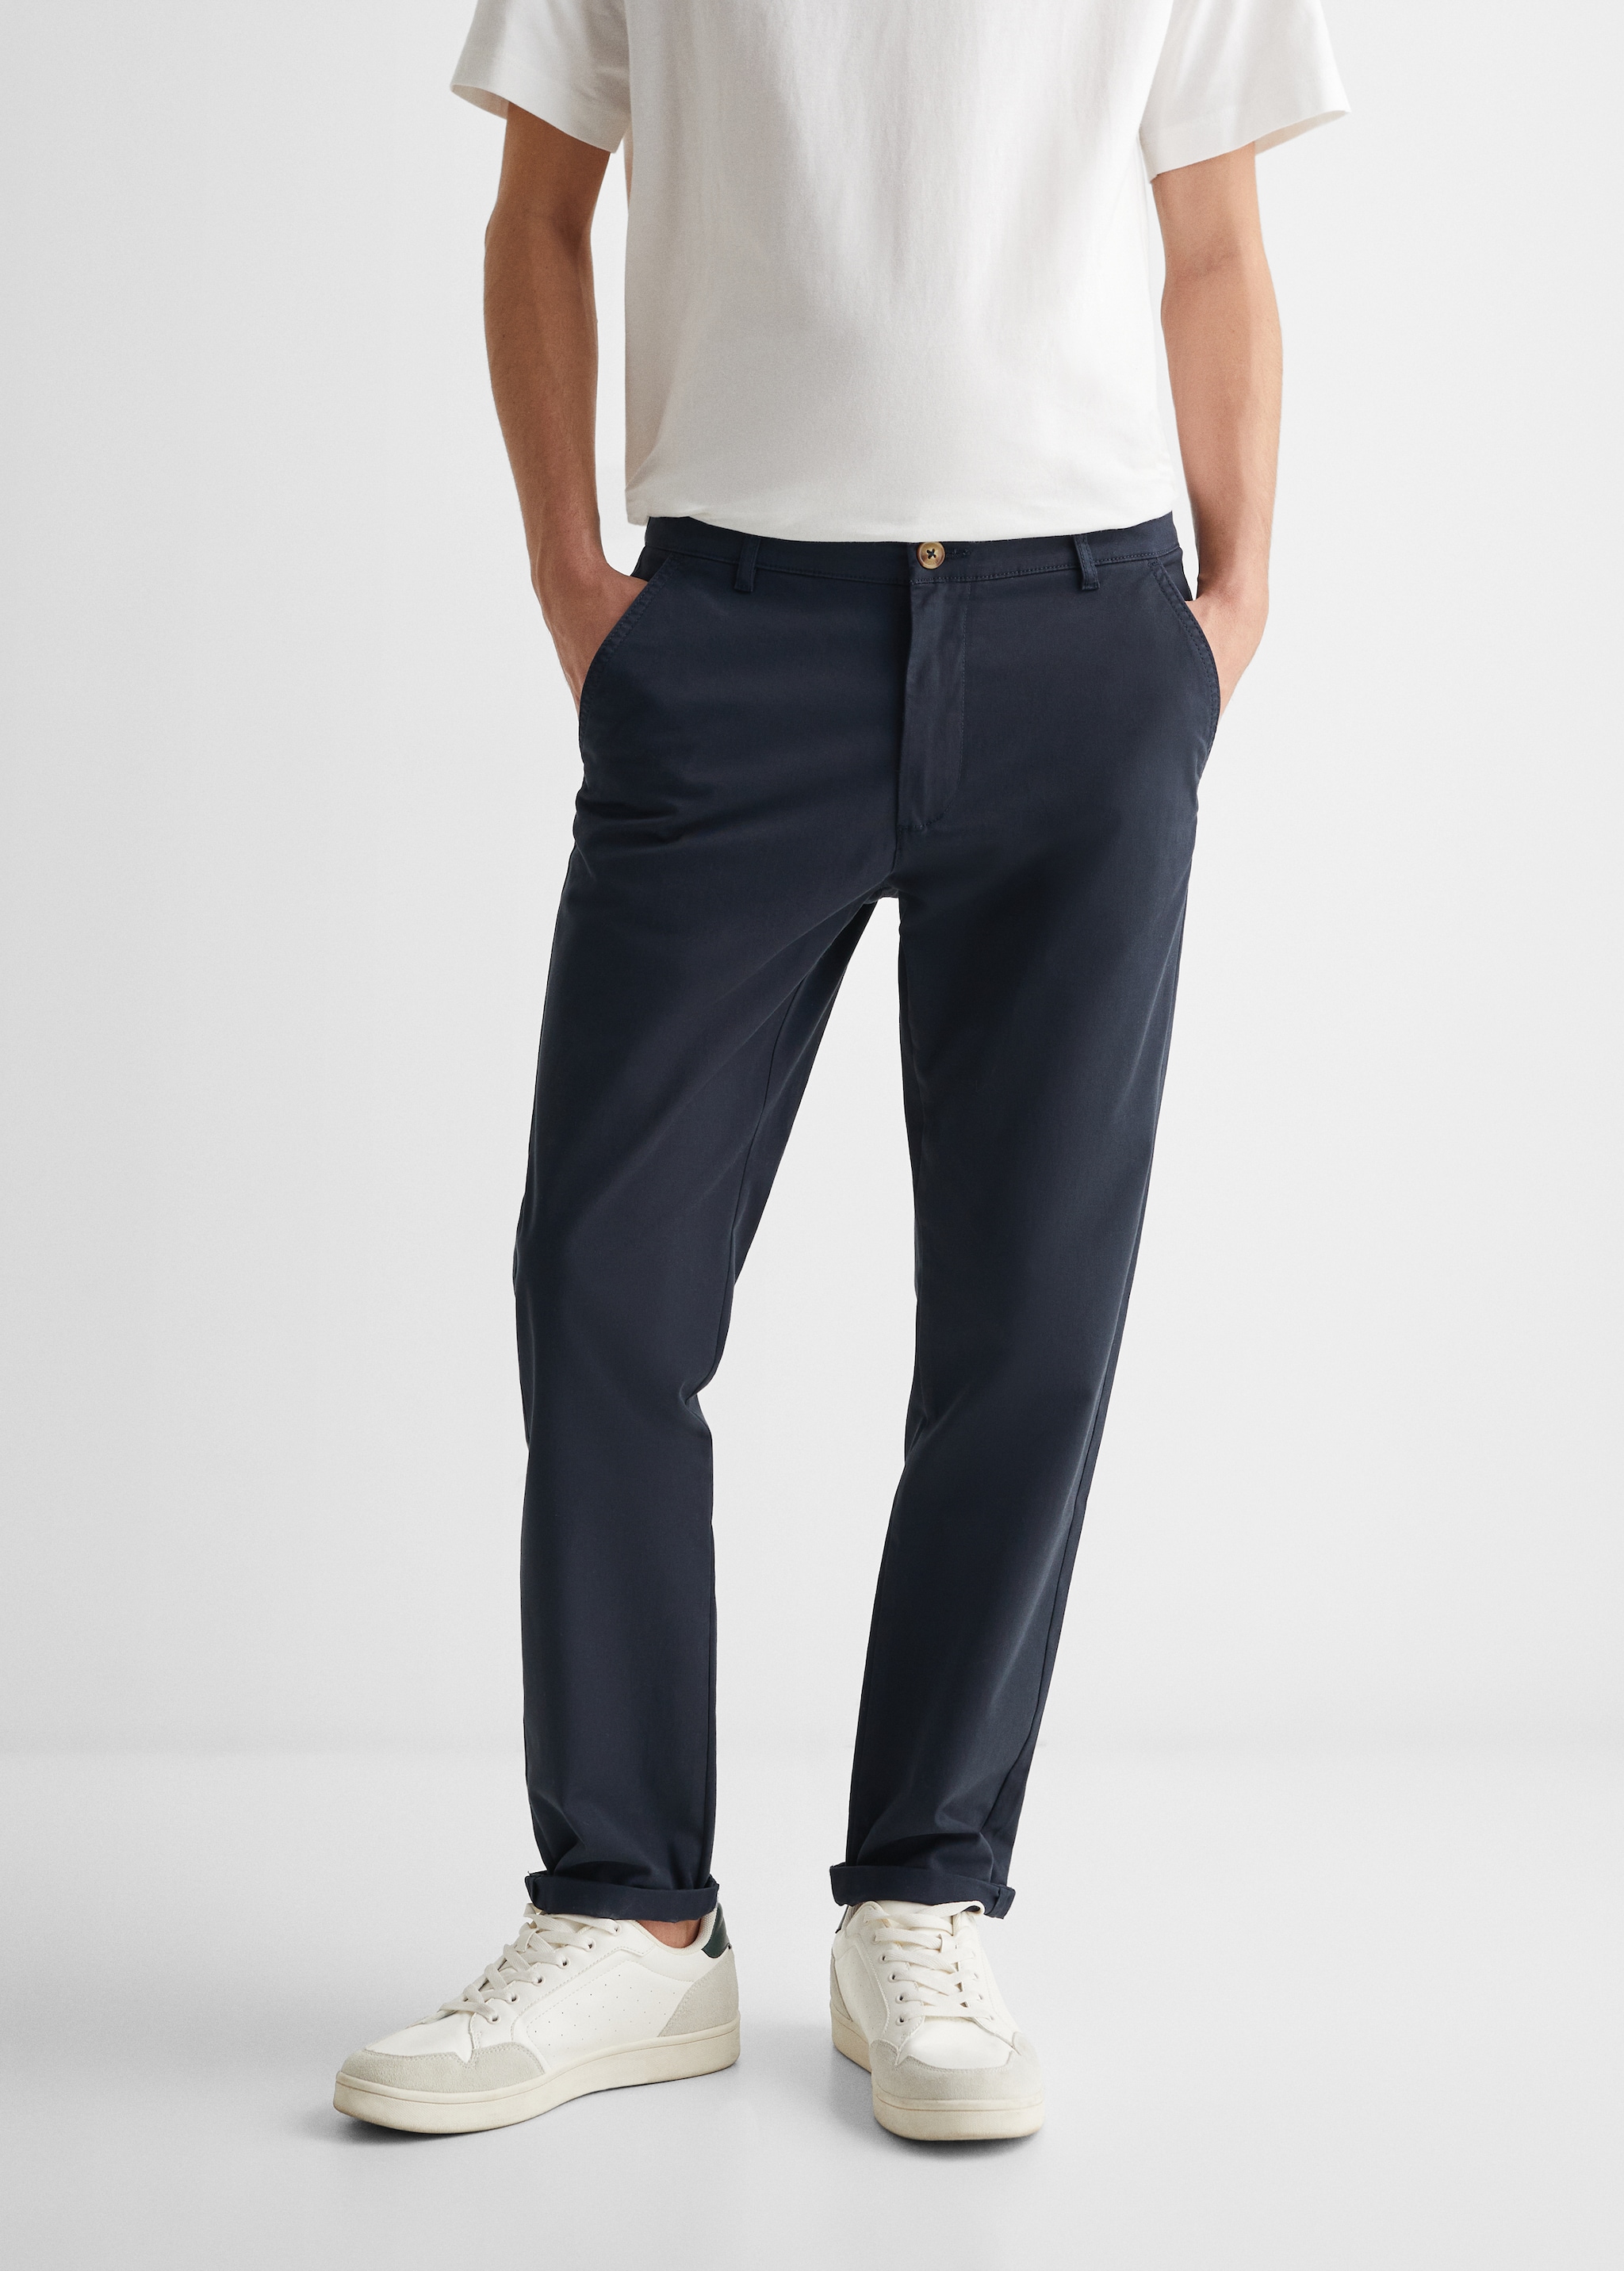 Cotton chinos - Details of the article 6